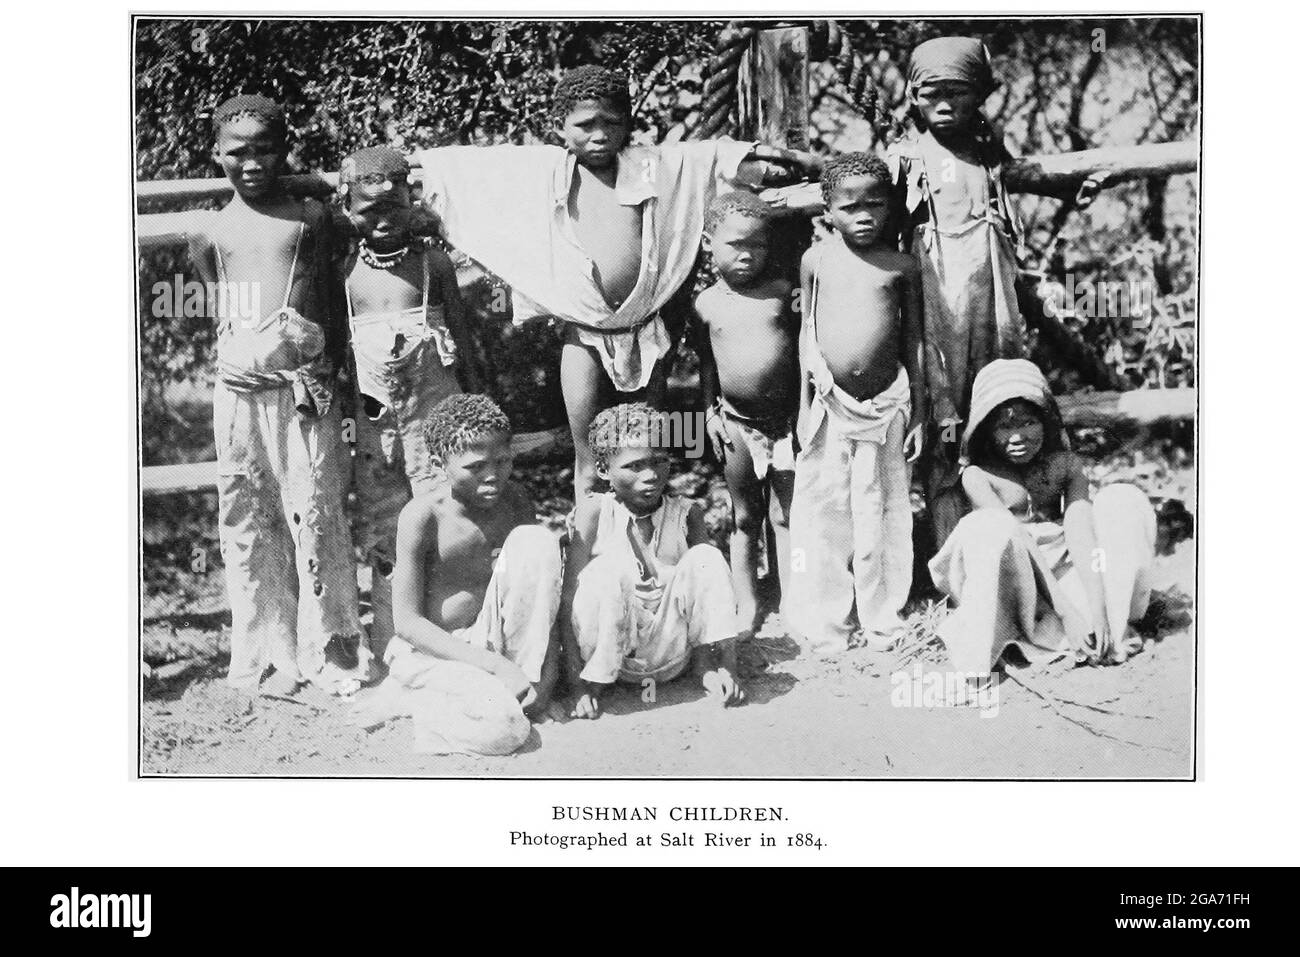 Bushman Children Photographed in Salt River in 1884 From the book '  Specimens of Bushman folklore ' by Bleek, W. H. I. (Wilhelm Heinrich Immanuel), Lloyd, Lucy Catherine, Theal, George McCall, 1837-1919 Published in London by  G. Allen & Company, ltd. in 1911. The San peoples (also Saan), or Bushmen, are members of various Khoe, Tuu, or Kxʼa-speaking indigenous hunter-gatherer groups that are the first nations of Southern Africa, and whose territories span Botswana, Namibia, Angola, Zambia, Zimbabwe, Lesotho and South Africa. Stock Photo